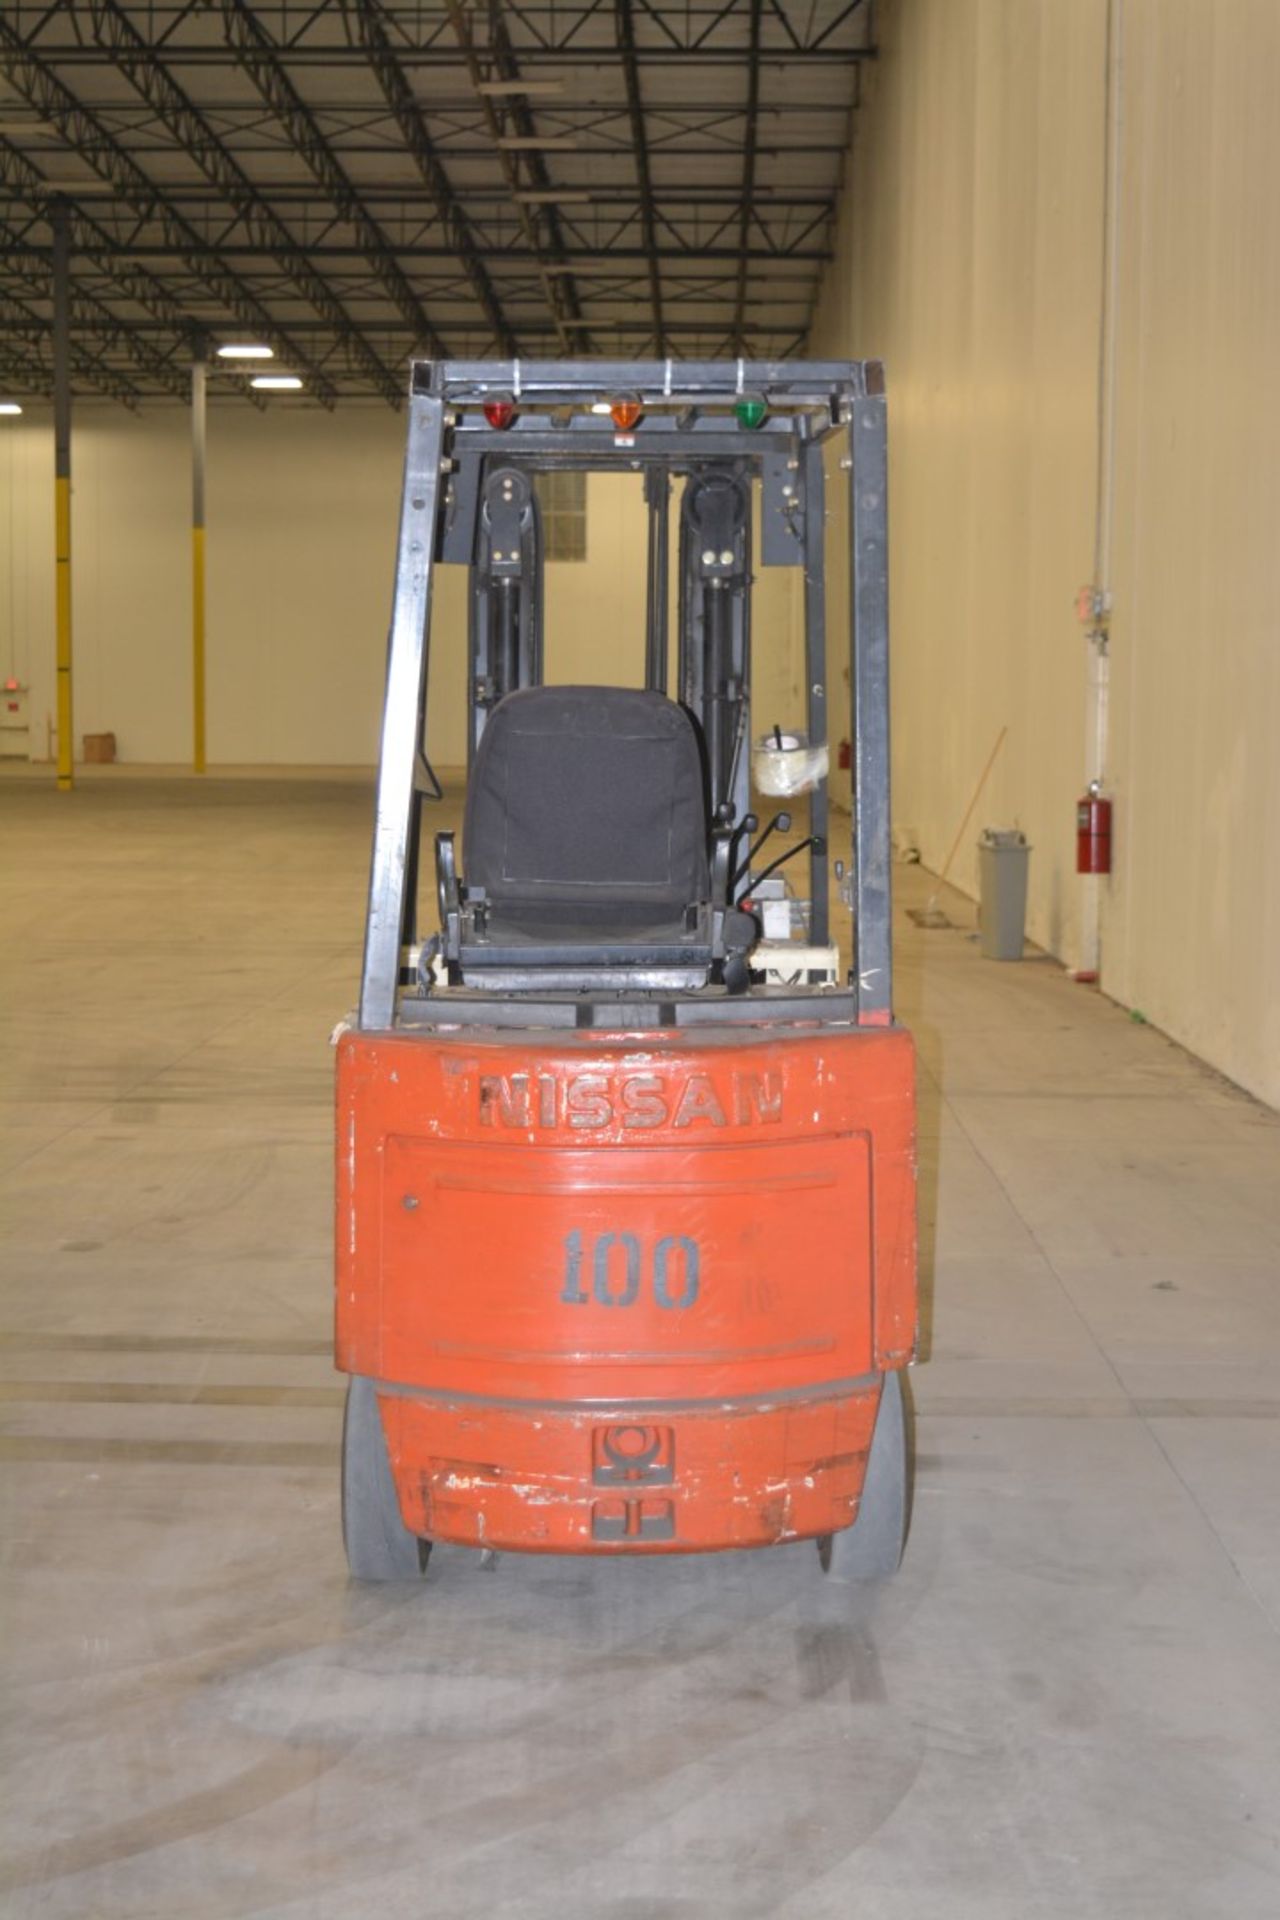 2005 NISSAN 4000 LBS CAPACITY ELECTRIC FORKLIFT, 2014 BATTERY, (WATCH VIDEO) - Image 4 of 5